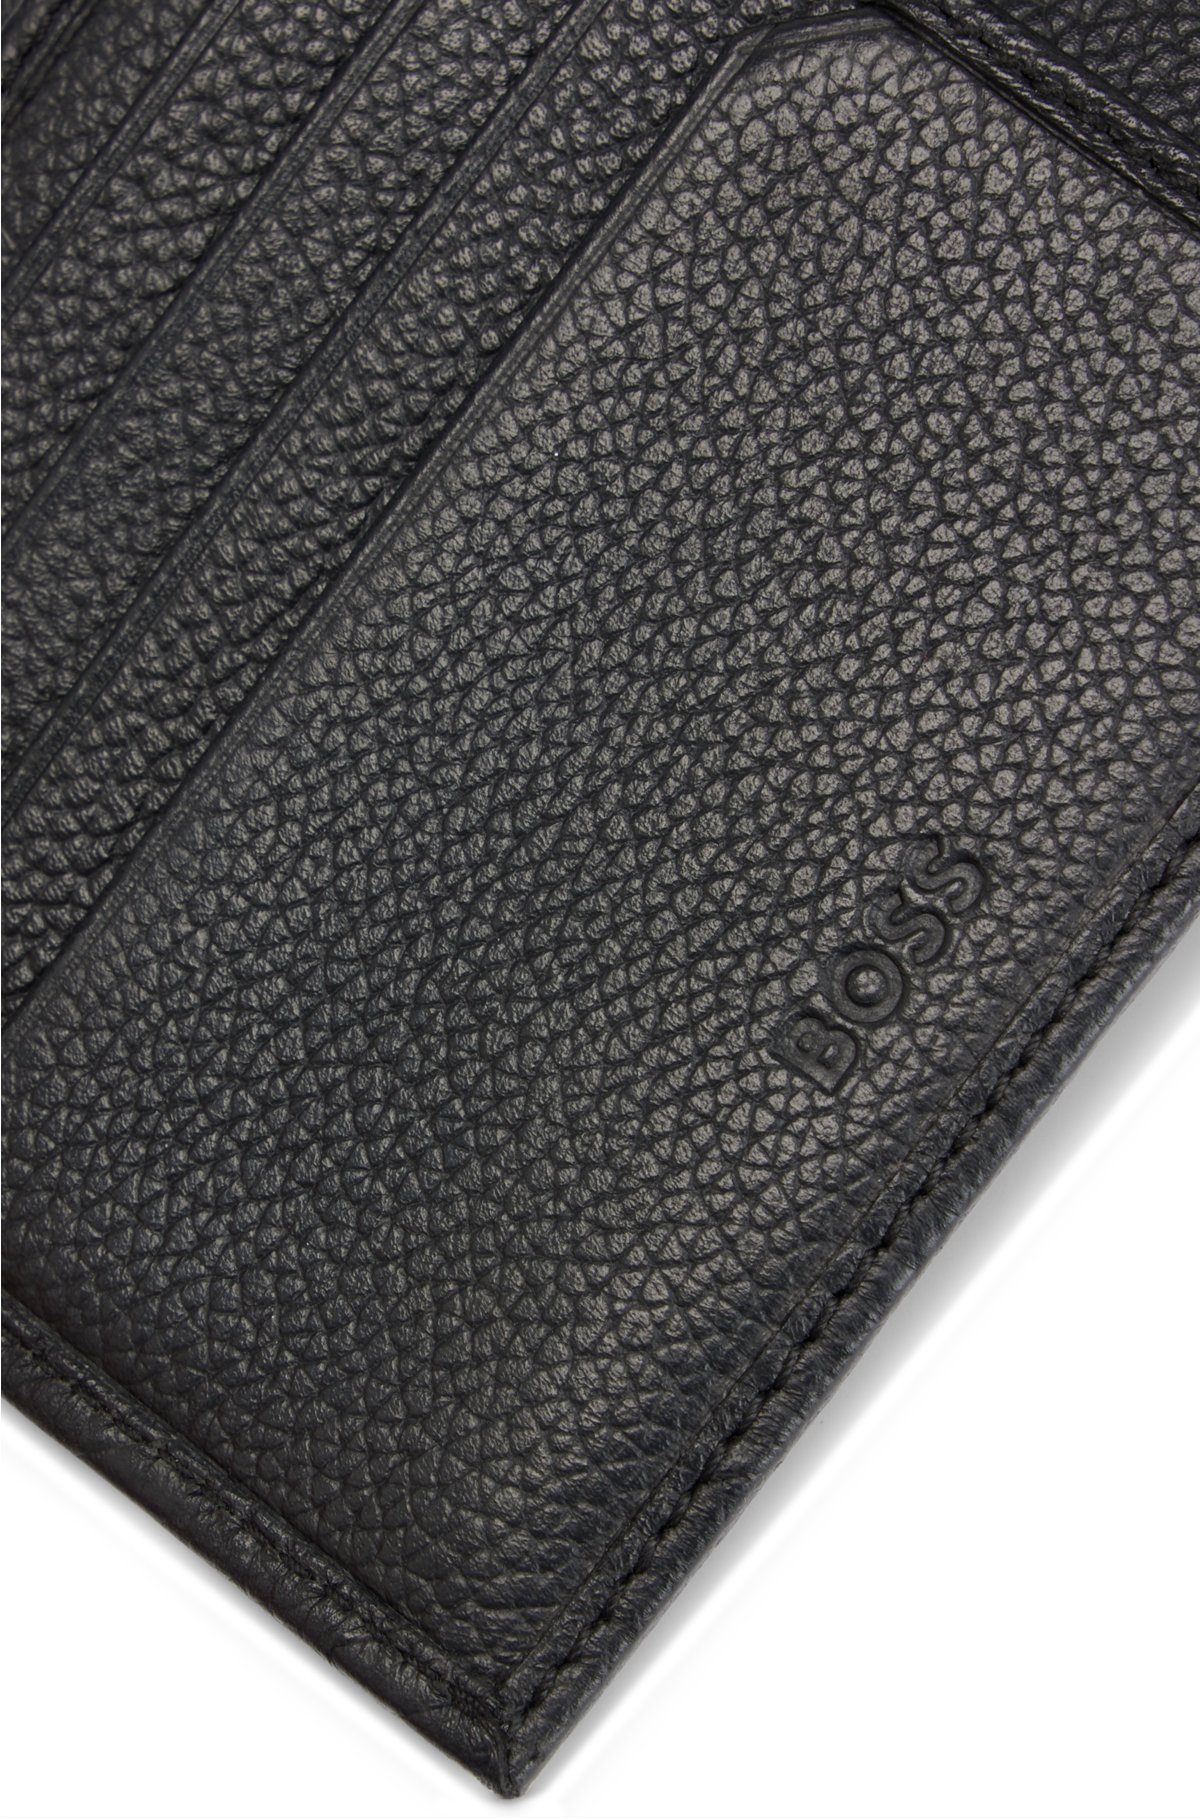 BOSS - Grained-leather card holder with embossed monograms